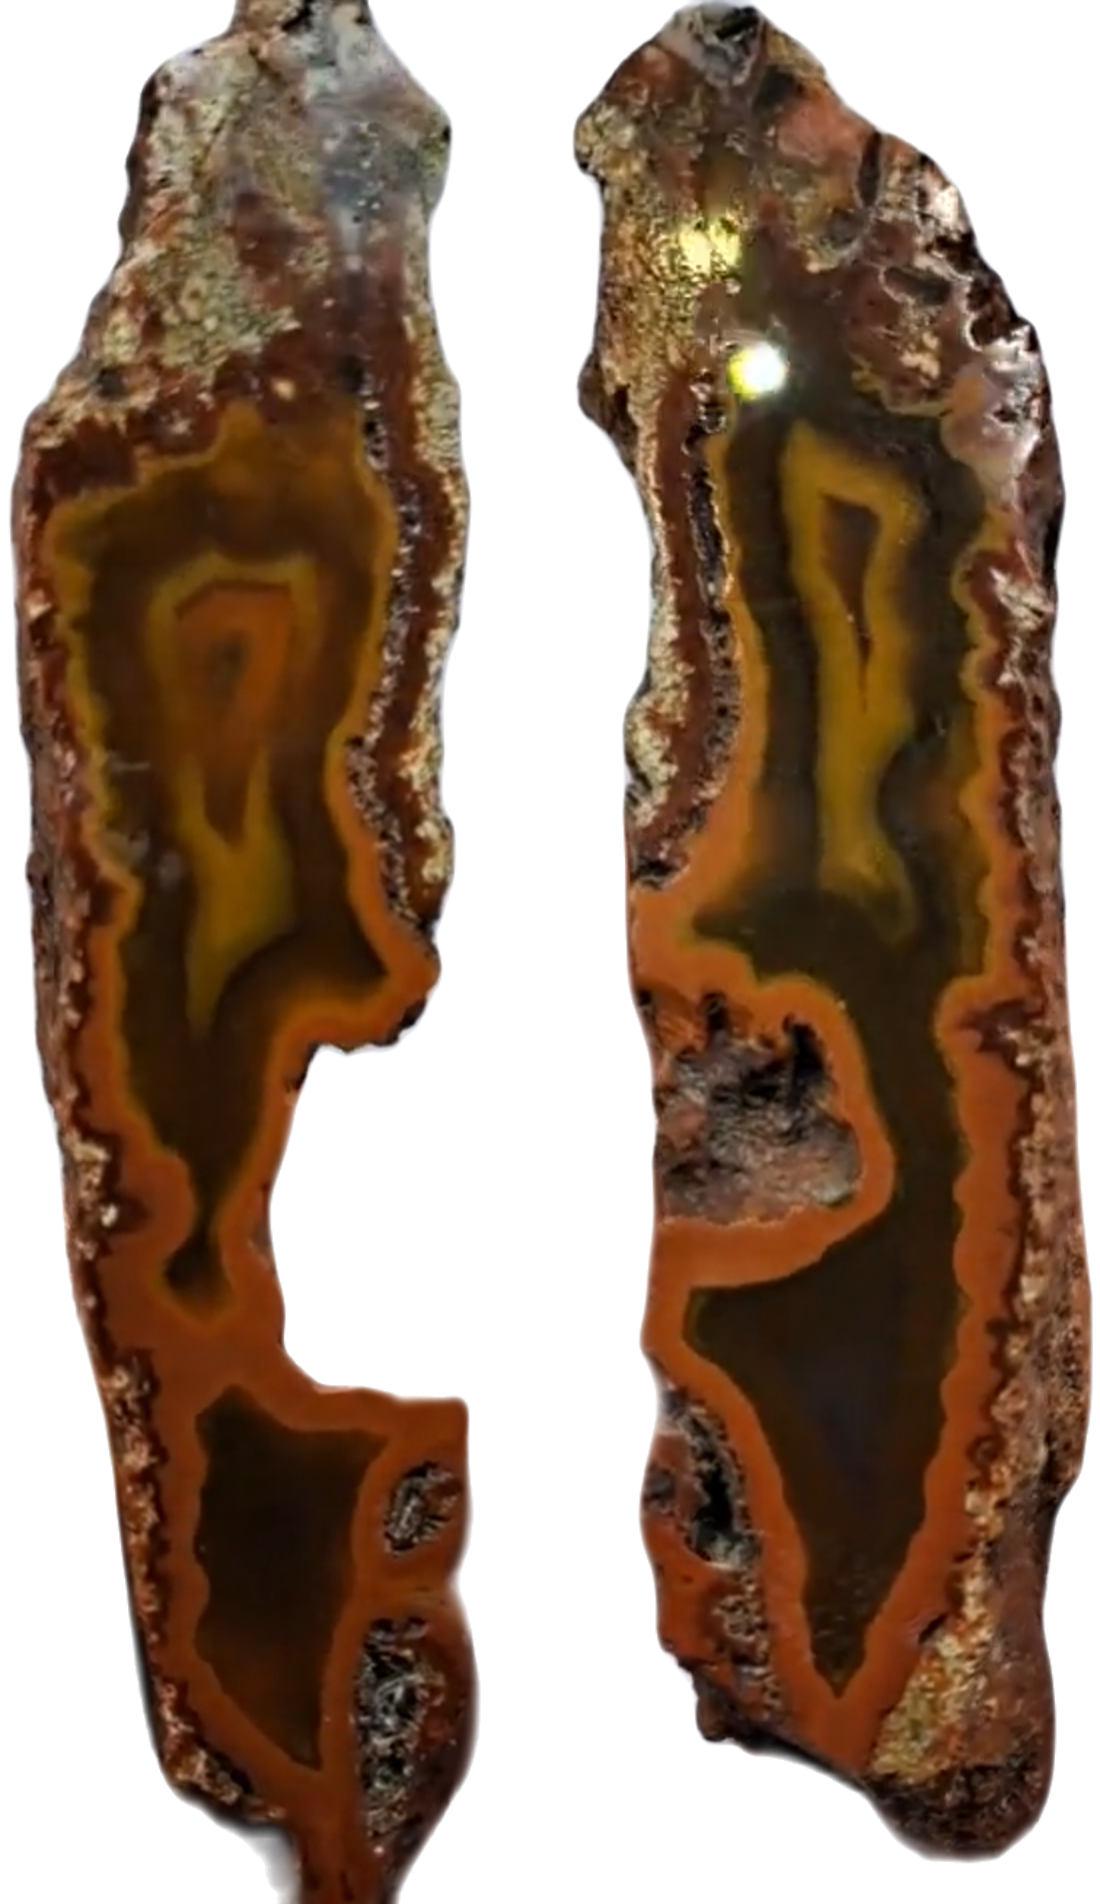 Sister Agates - Matching Pair from Geode Sliced in Half